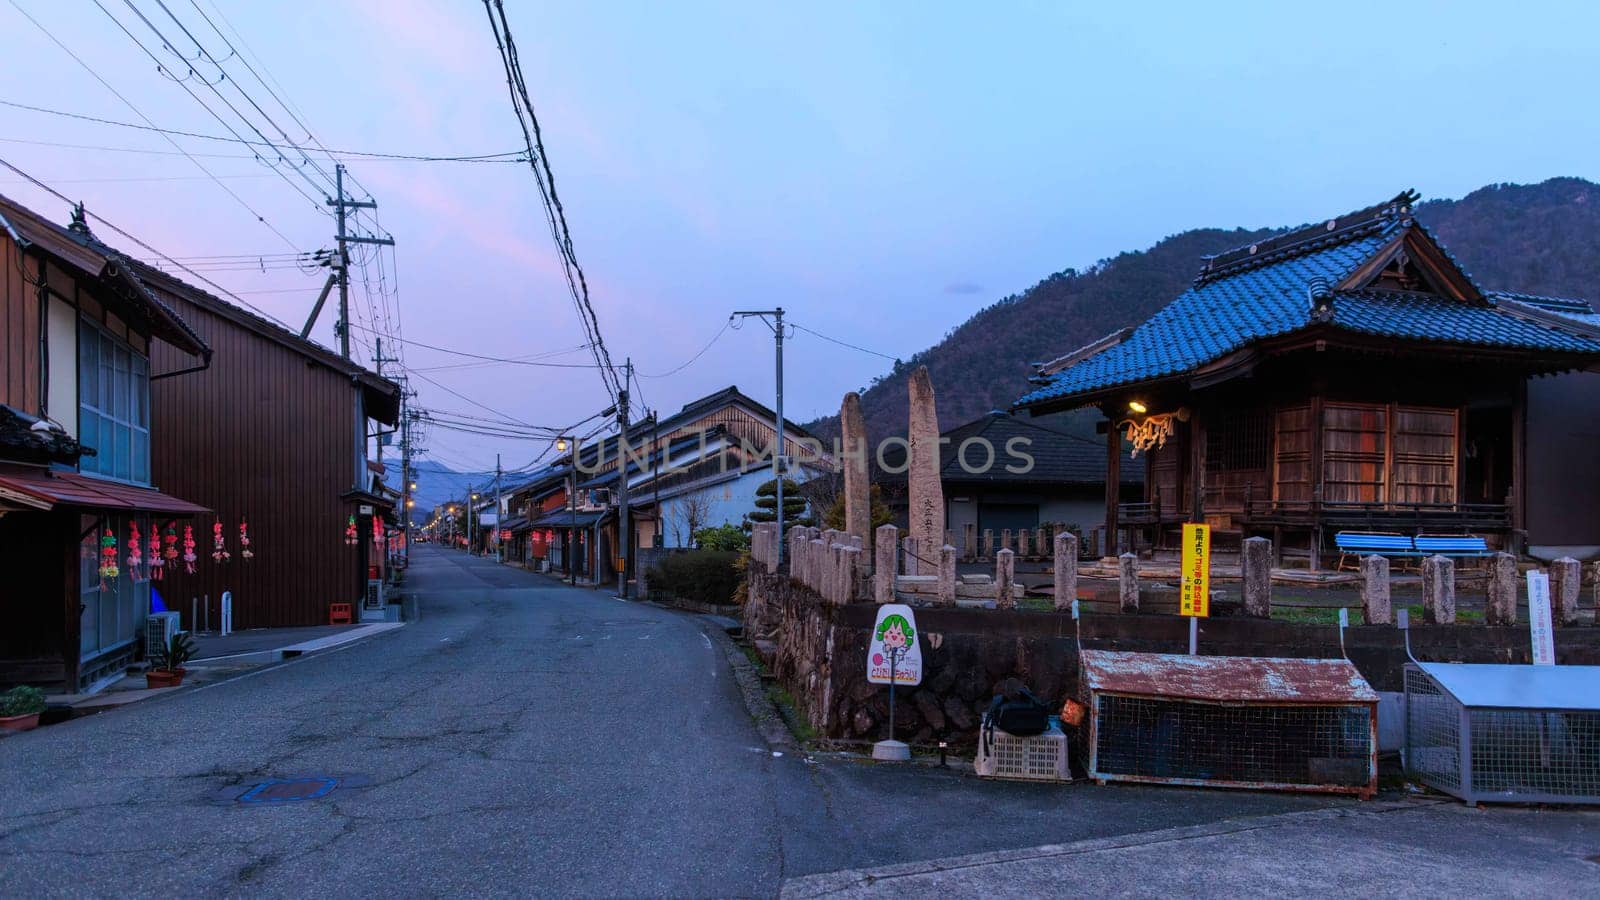 Quiet street with traditional wooden houses in Japanese village at sunset by Osaze